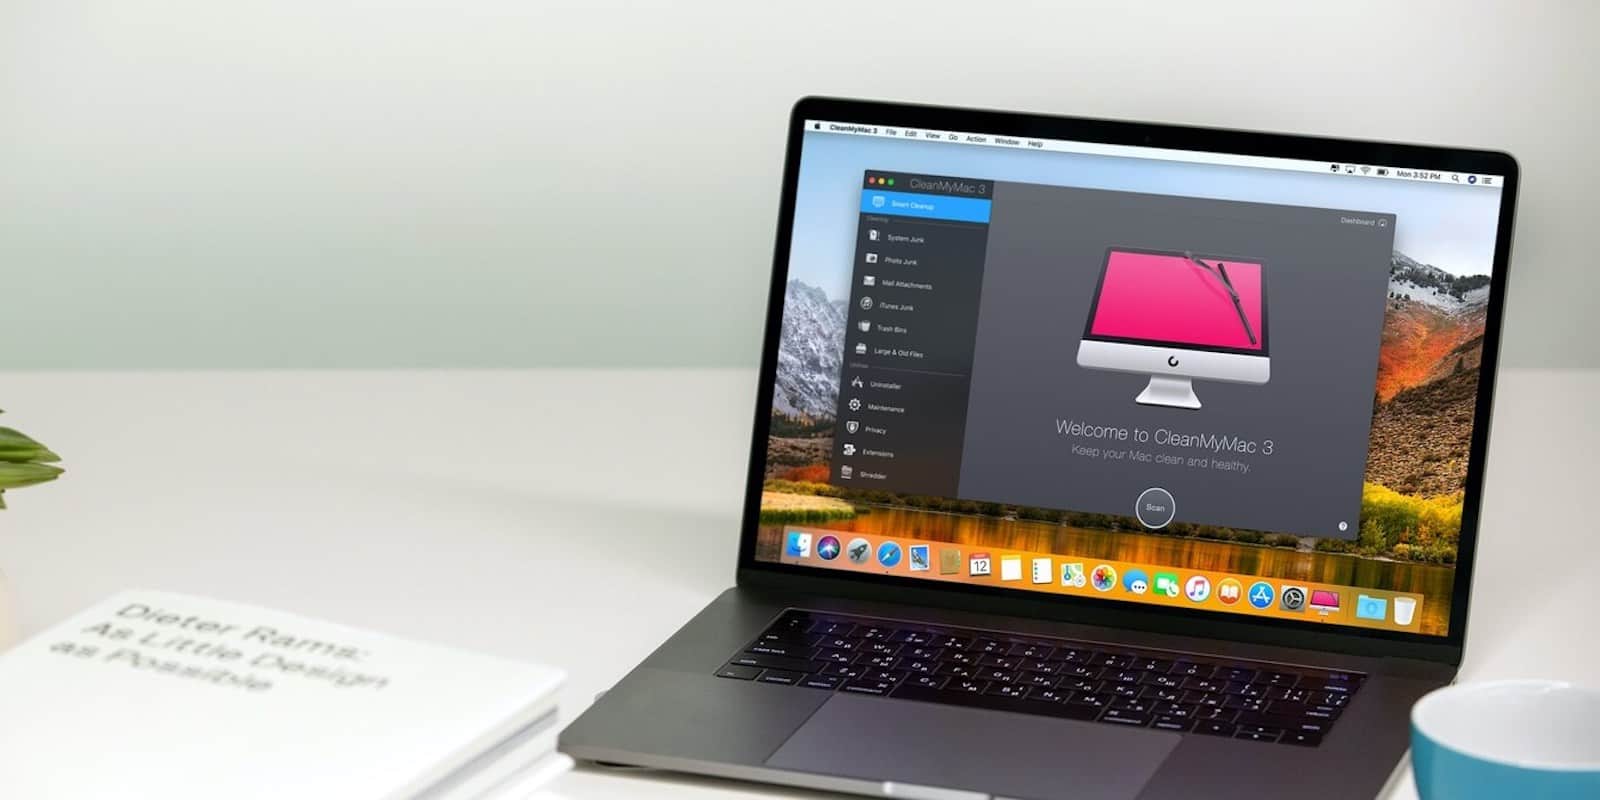 This app makes it easy to keep your Mac healthy and clear of junk files.